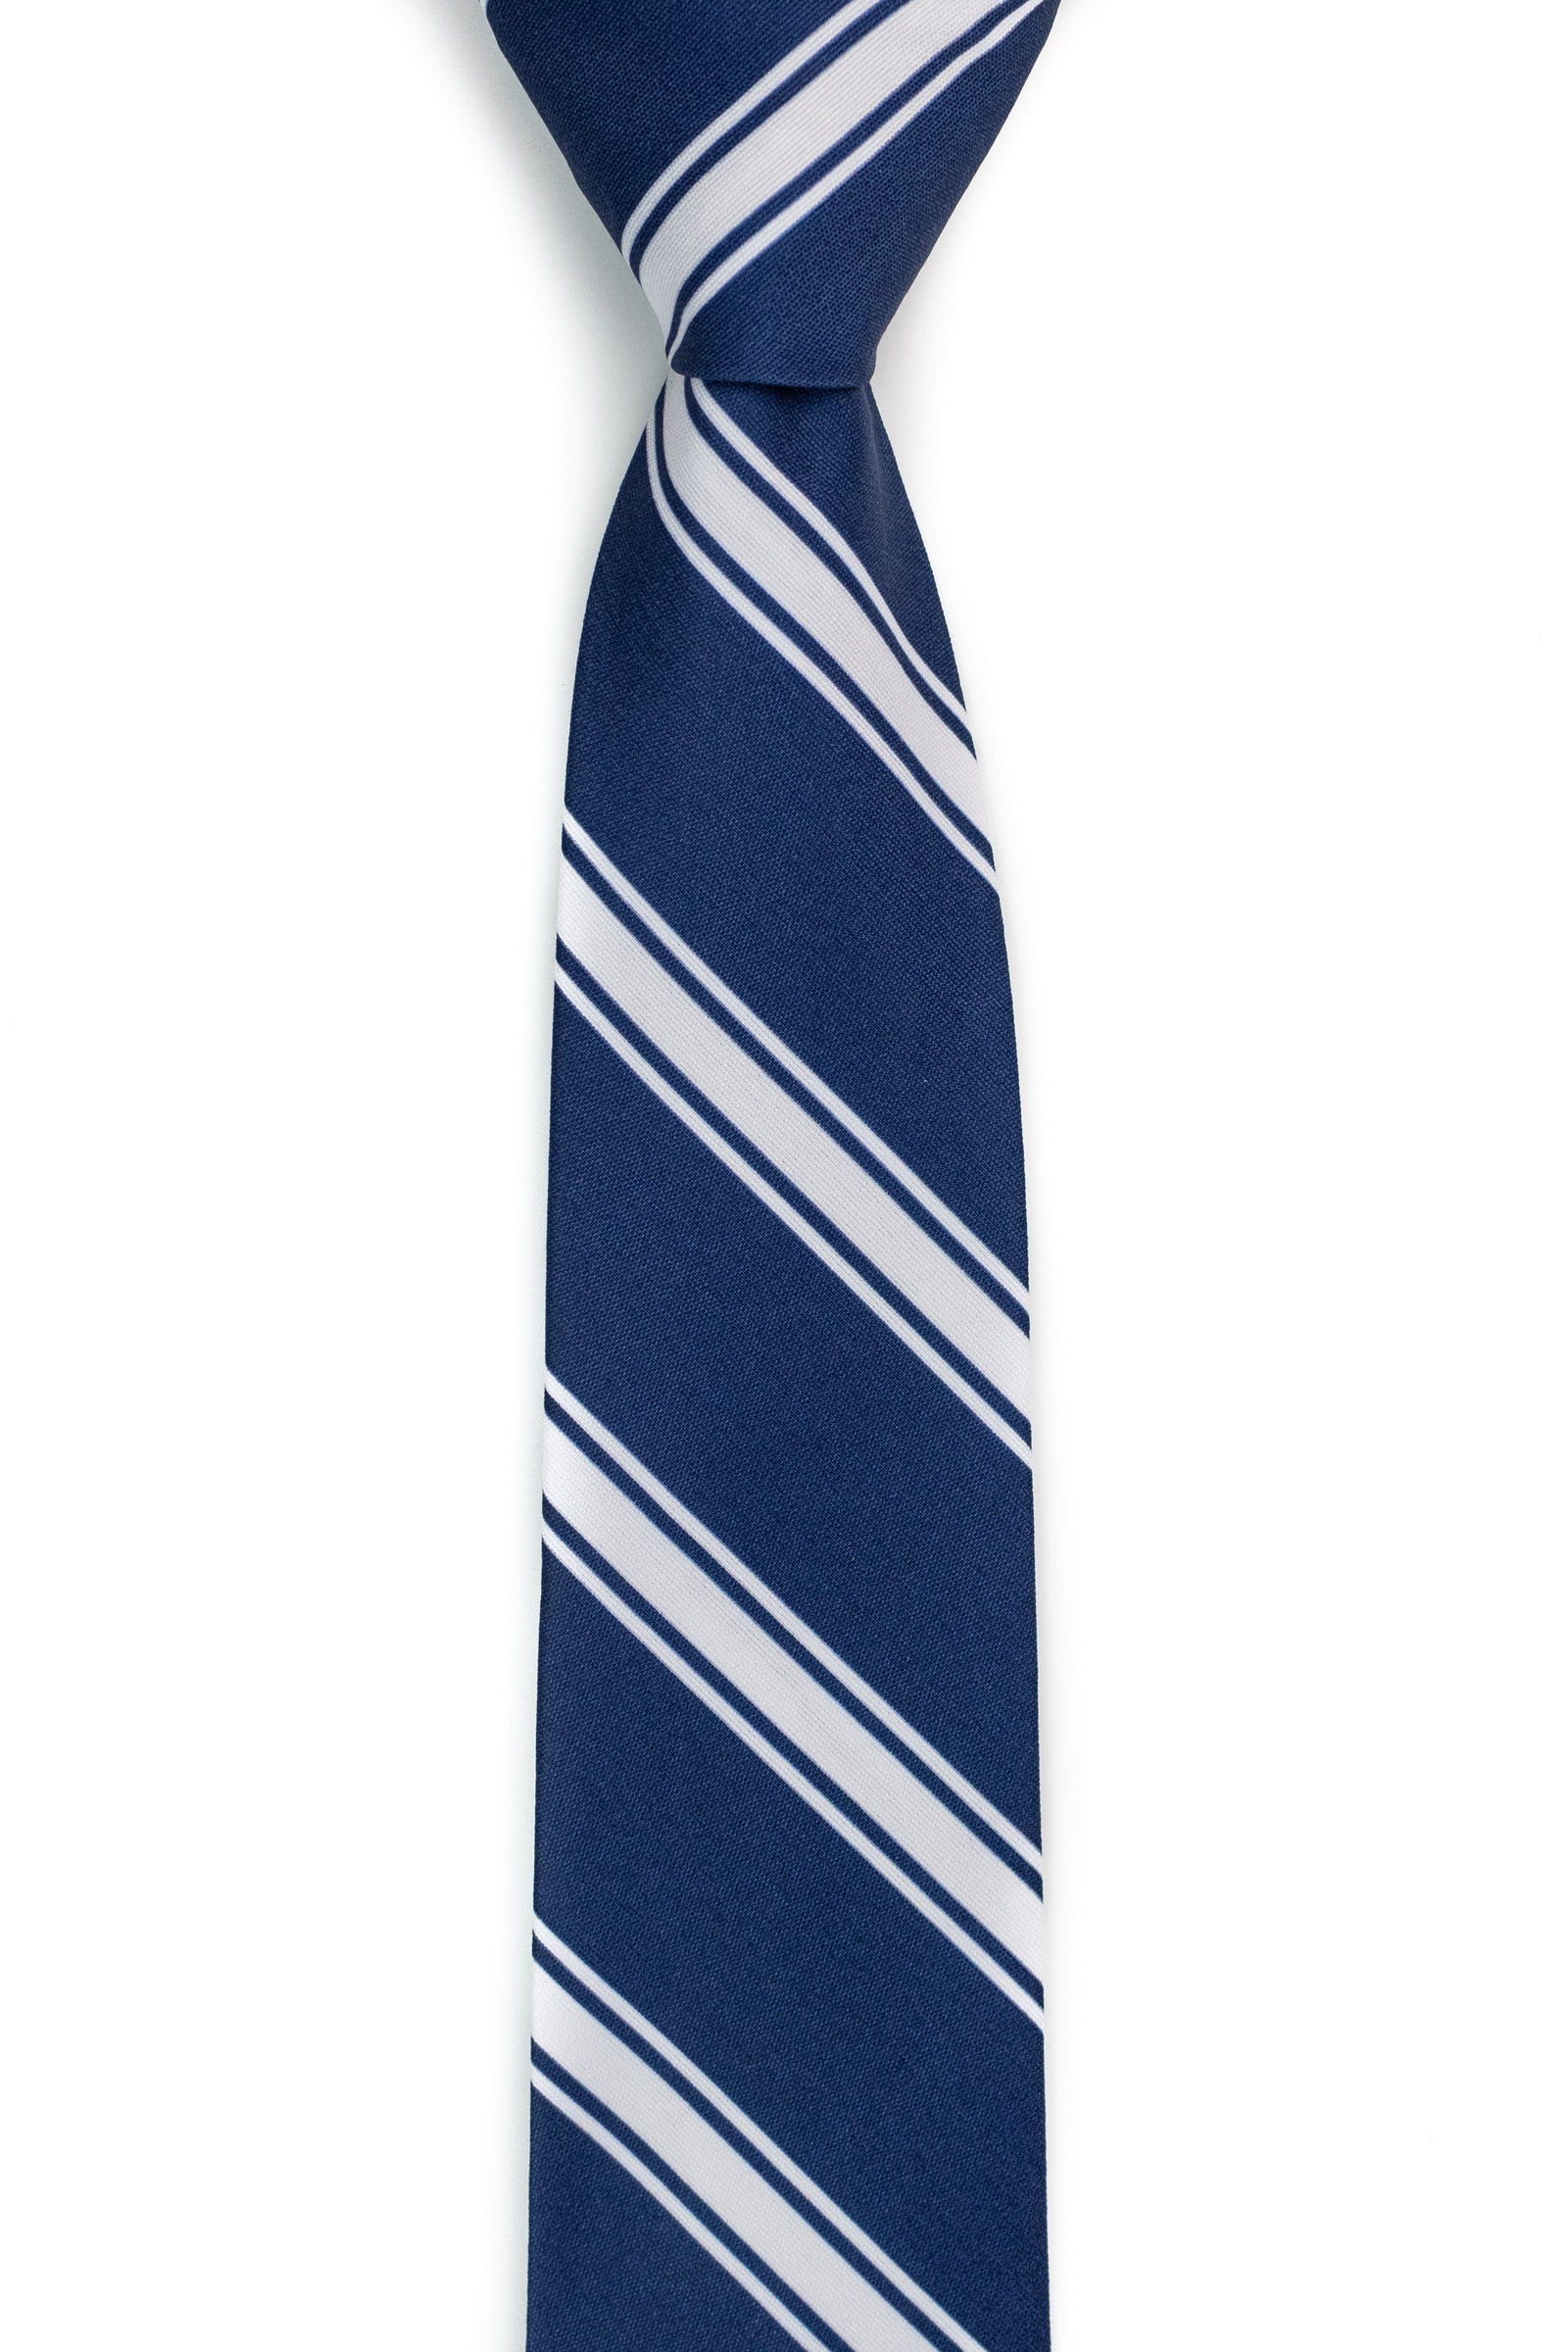 Machine-Washable Ties | Easy-to-Clean, Stain-Resistant Ties